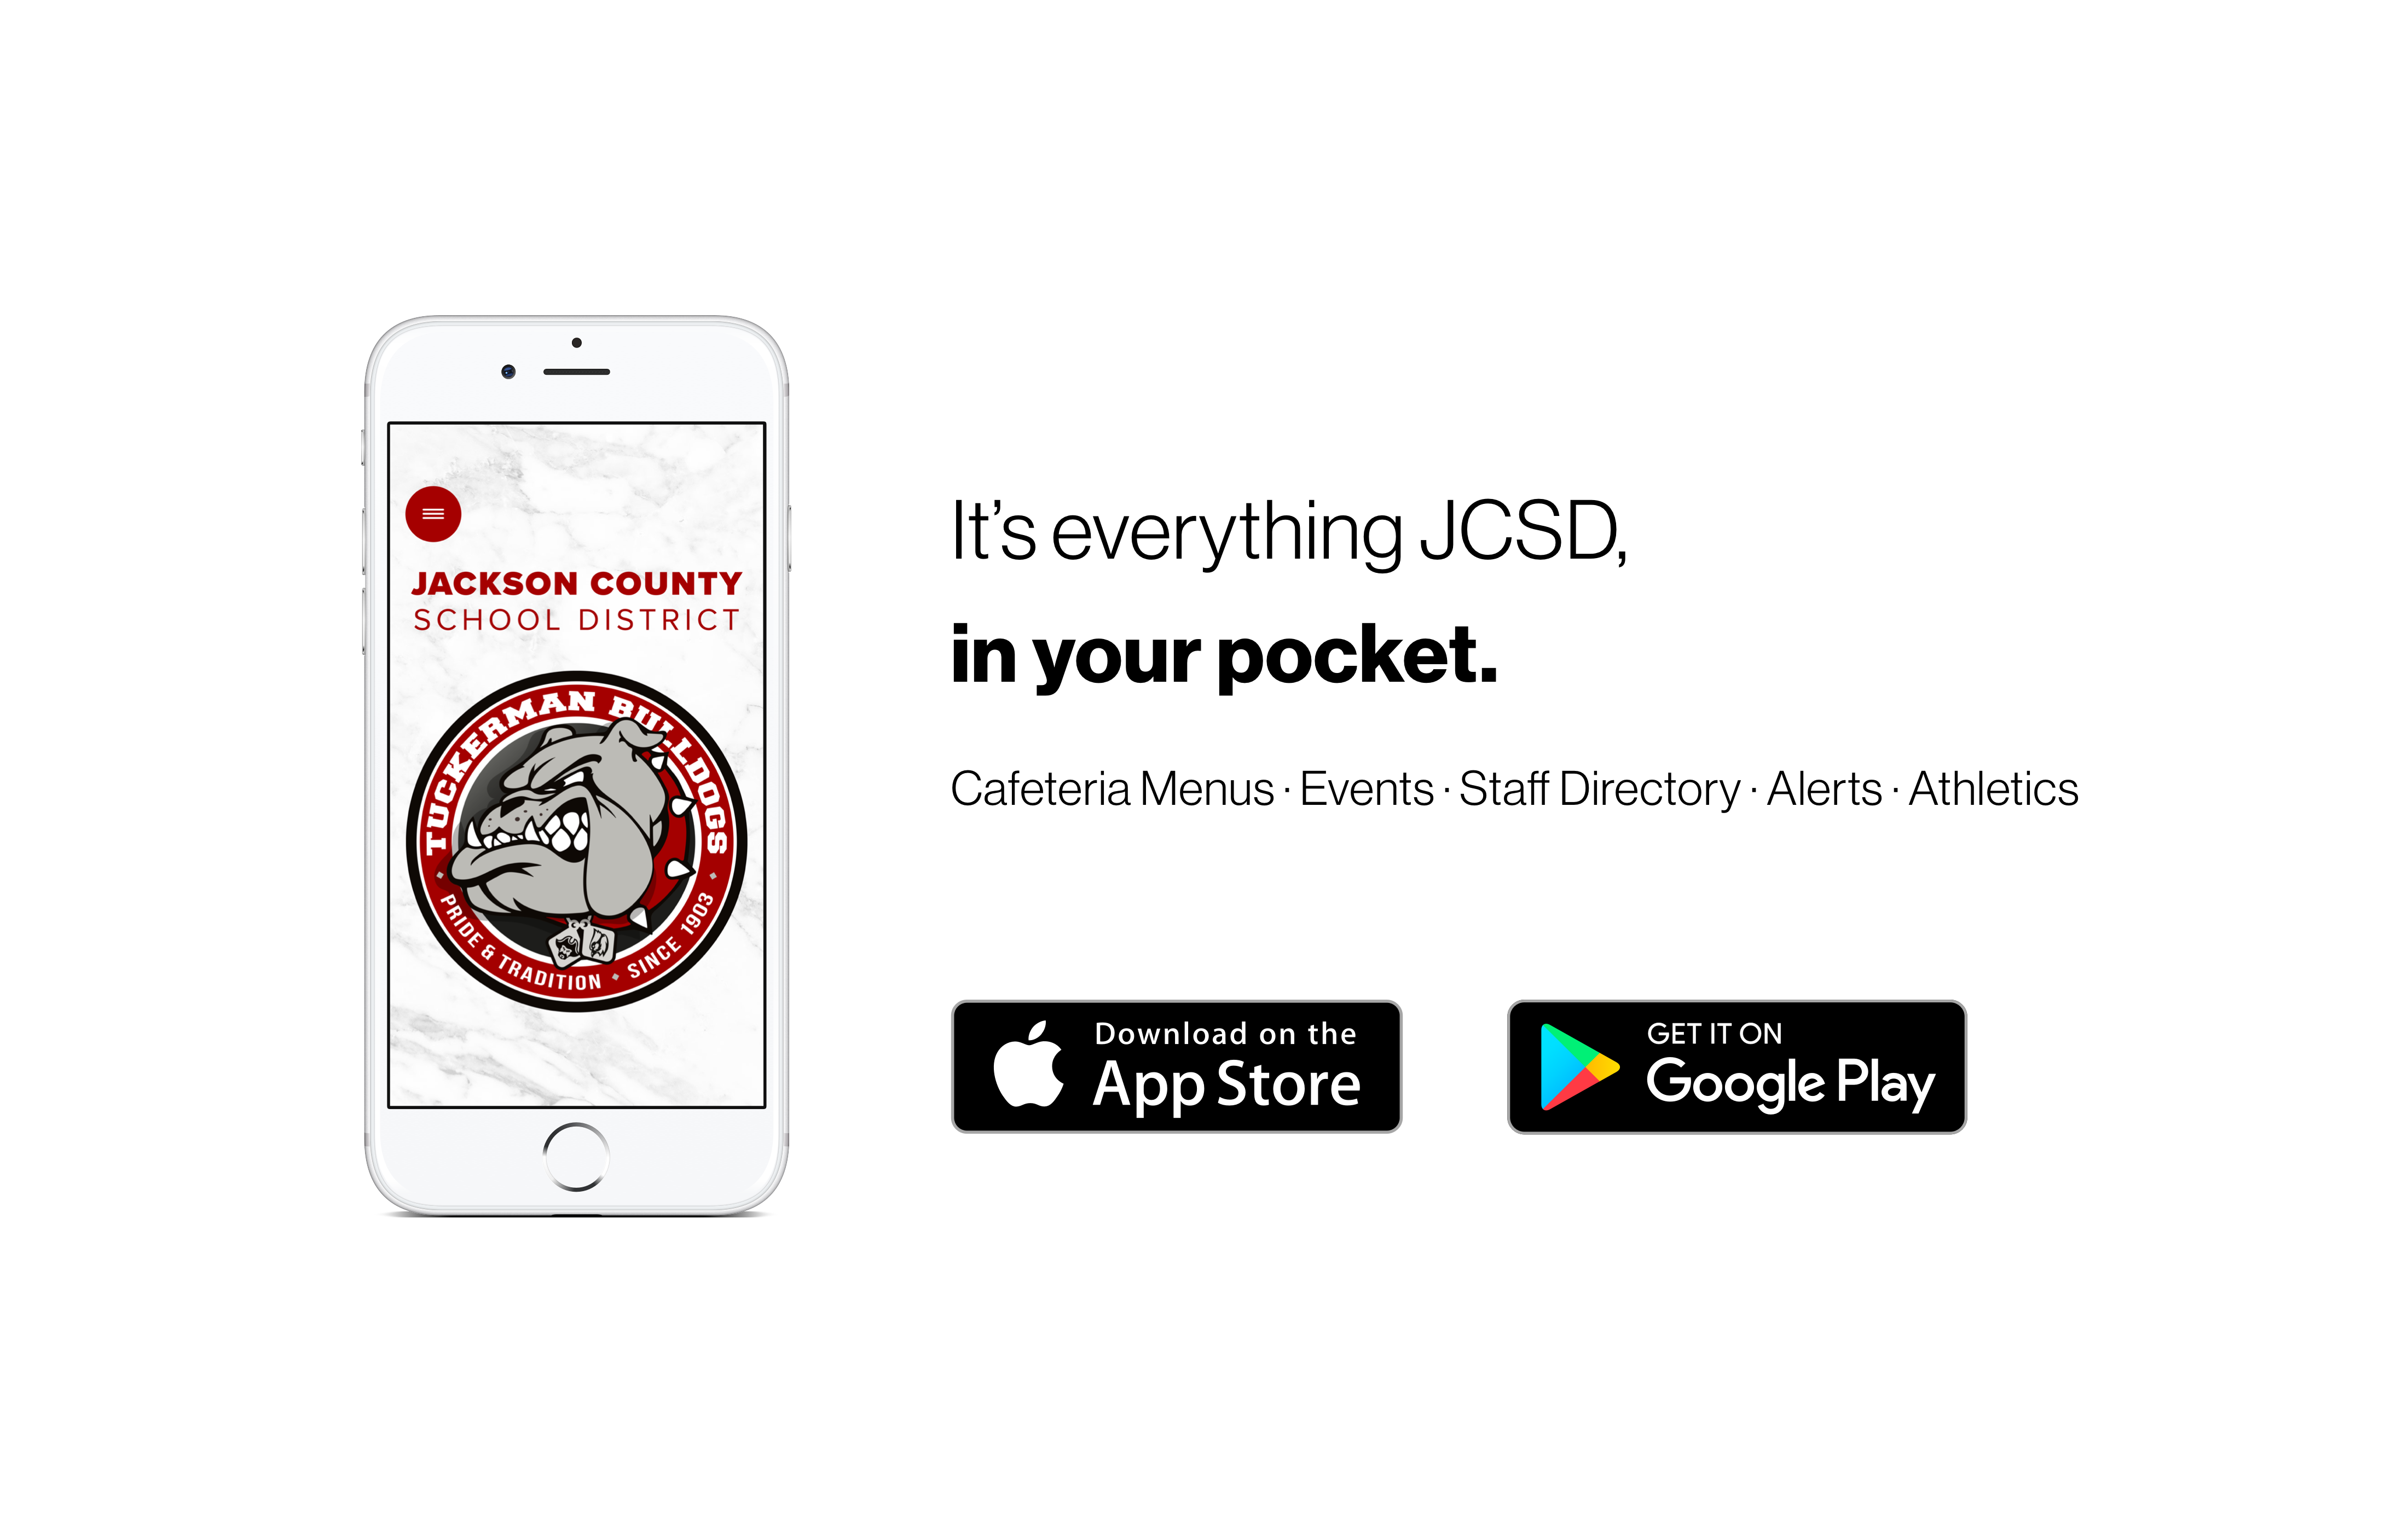 It's everything JCSD, in your pocket. 